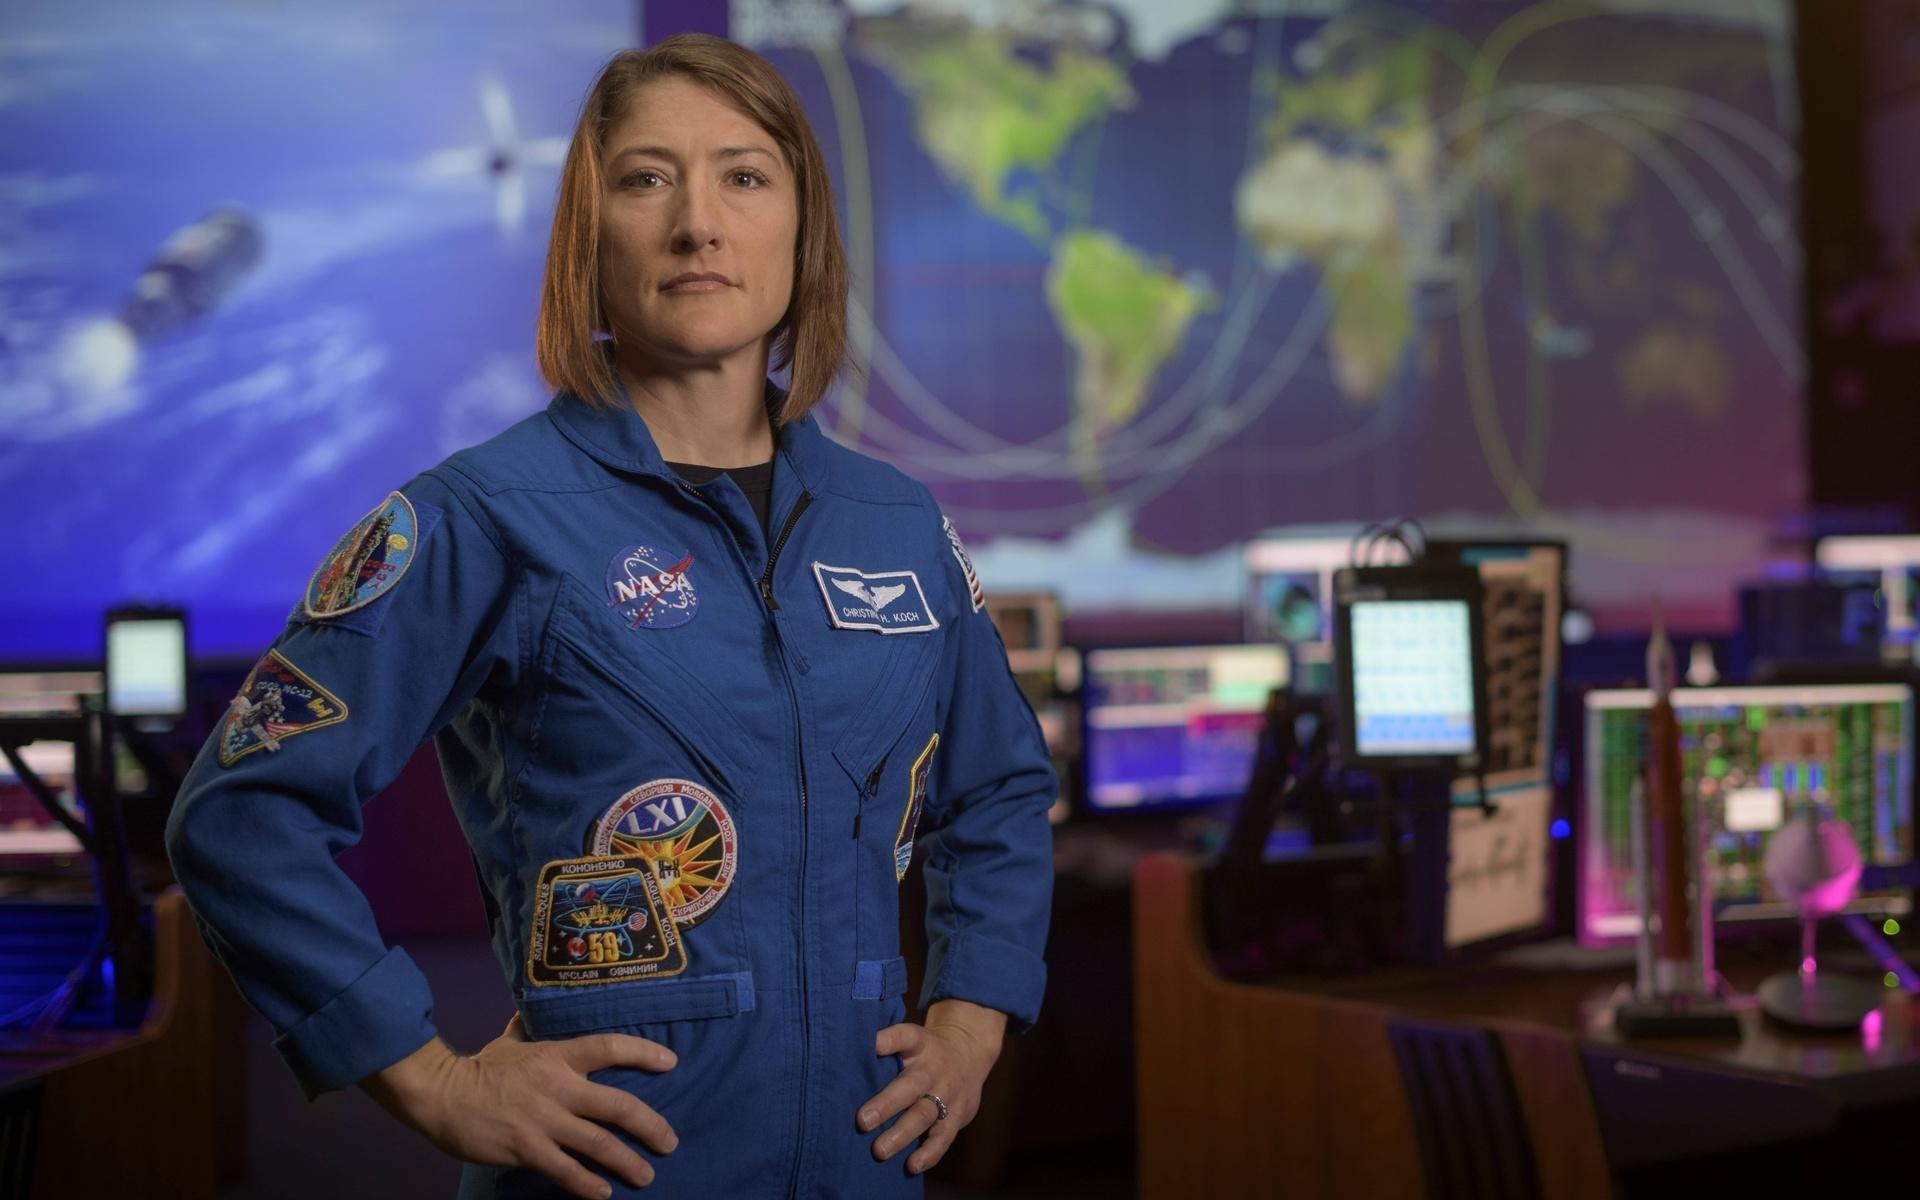 female astronaut christina koch nasa standing with arms on hips